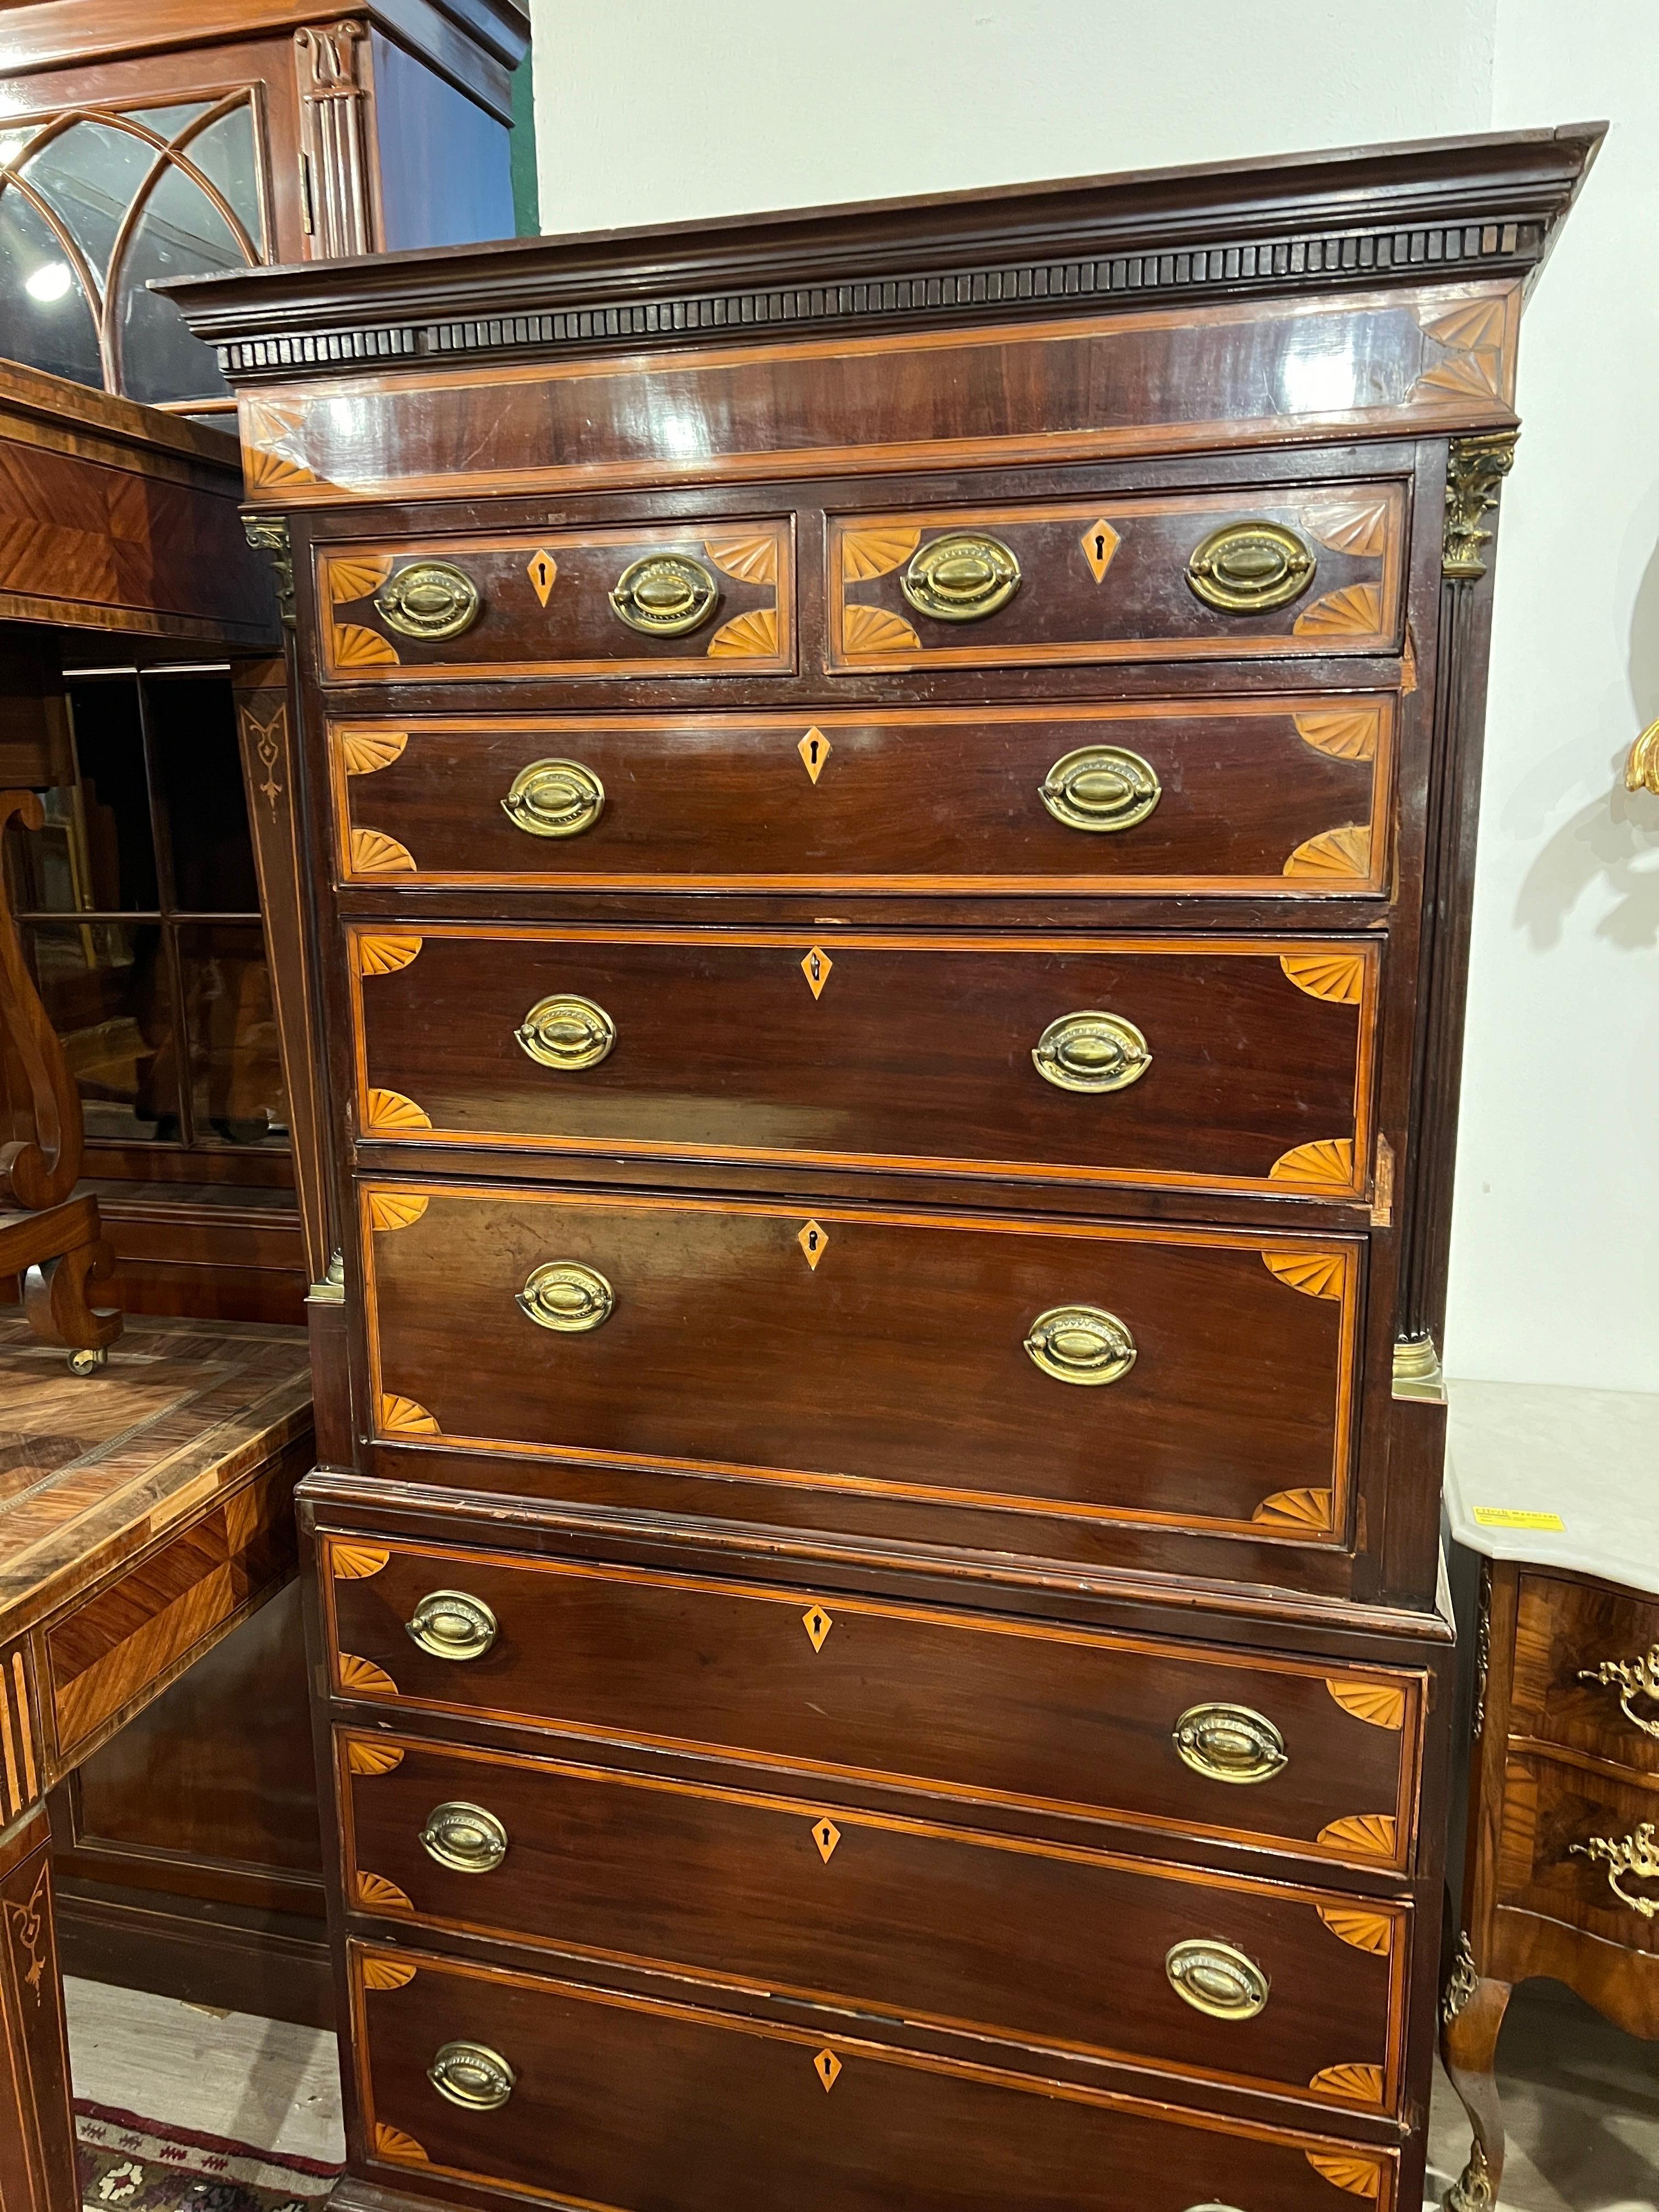 Inlay 18th Century English George III Mahogany Inlaid Secretaire Chest of Drawers 1700 For Sale